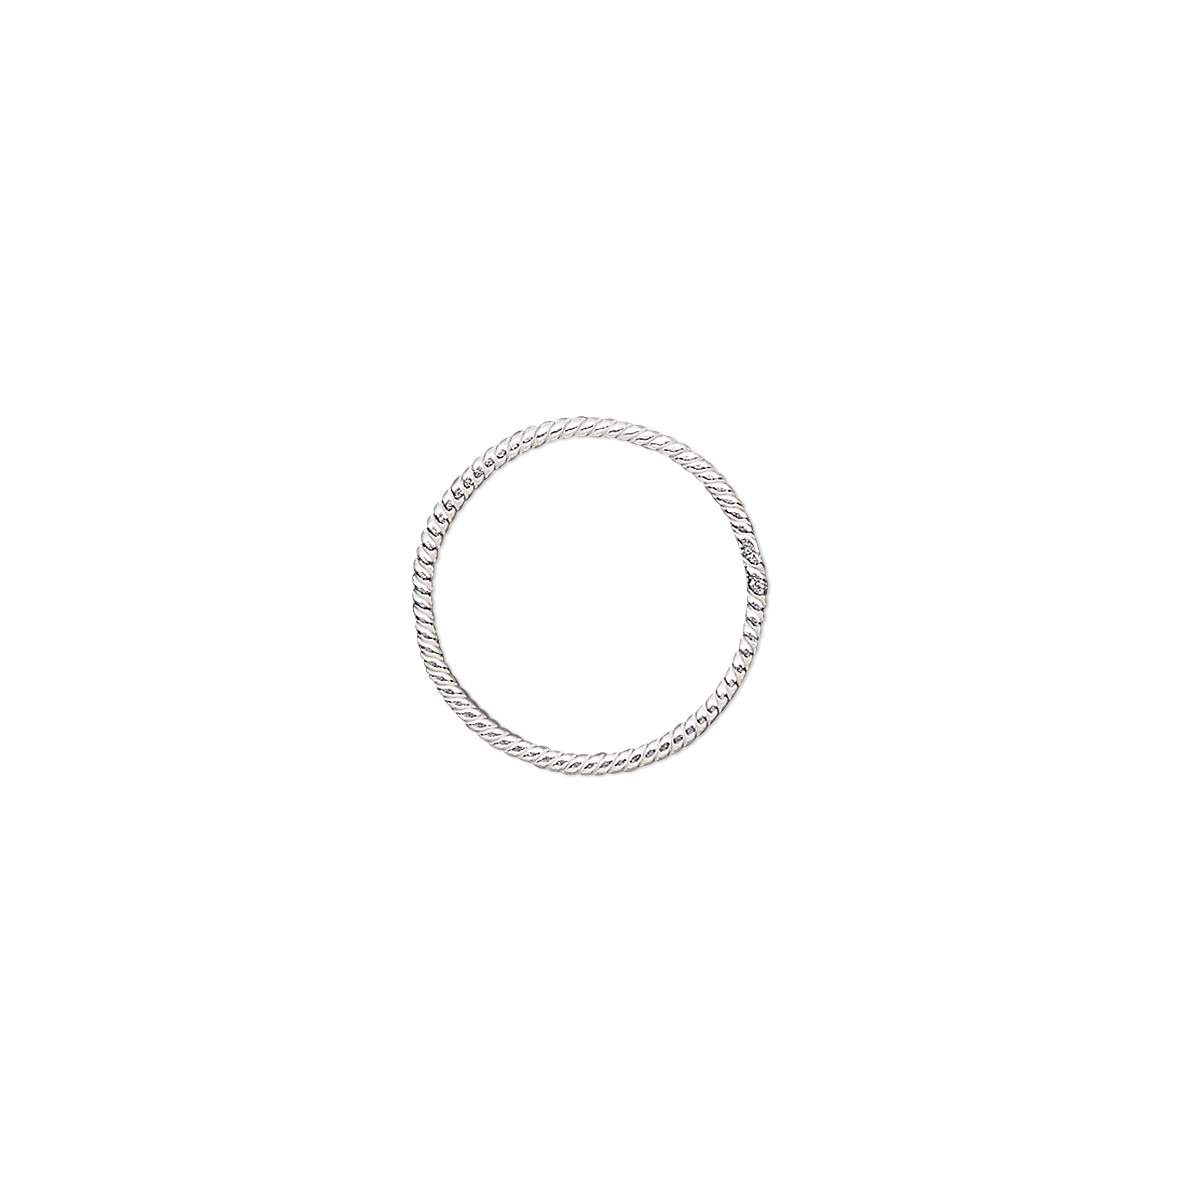 Jump ring, sterling silver, 14mm soldered twisted round, 12.6mm inside ...